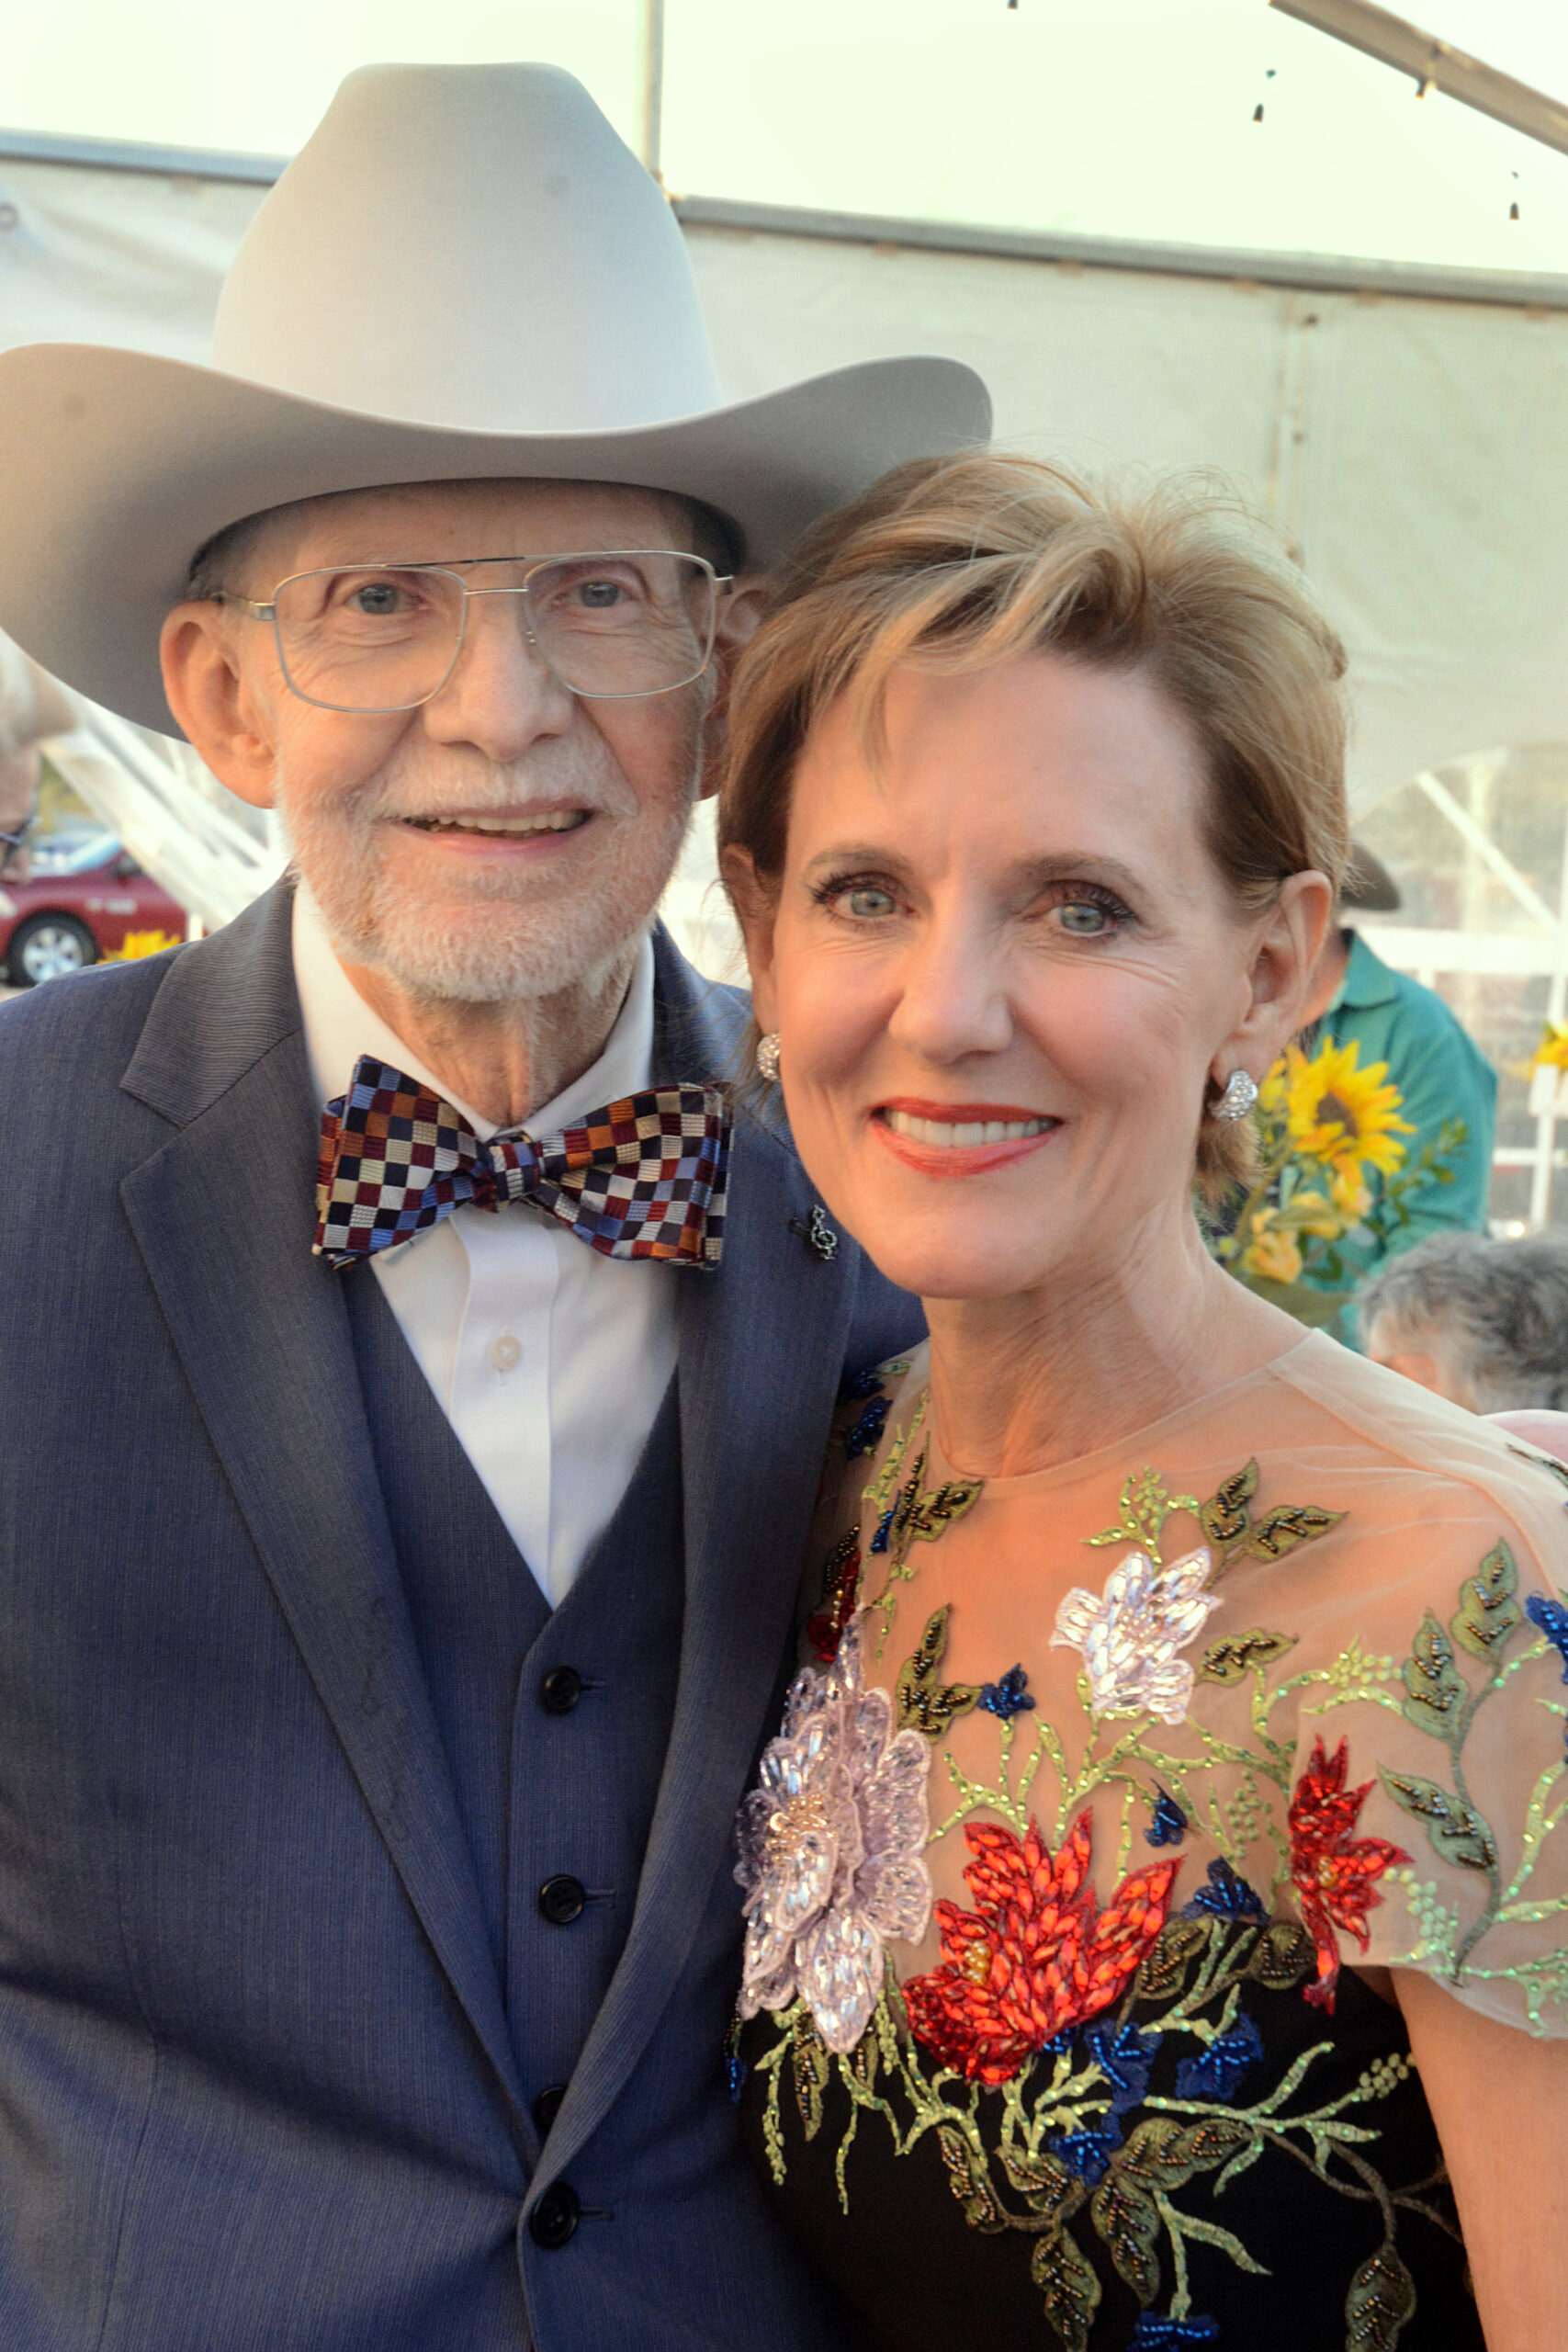 YTA's founder Jim Pokorski and his wife, YTA's president/CEO Susie Pokorski in the tent. (Photo by Dave Clements)